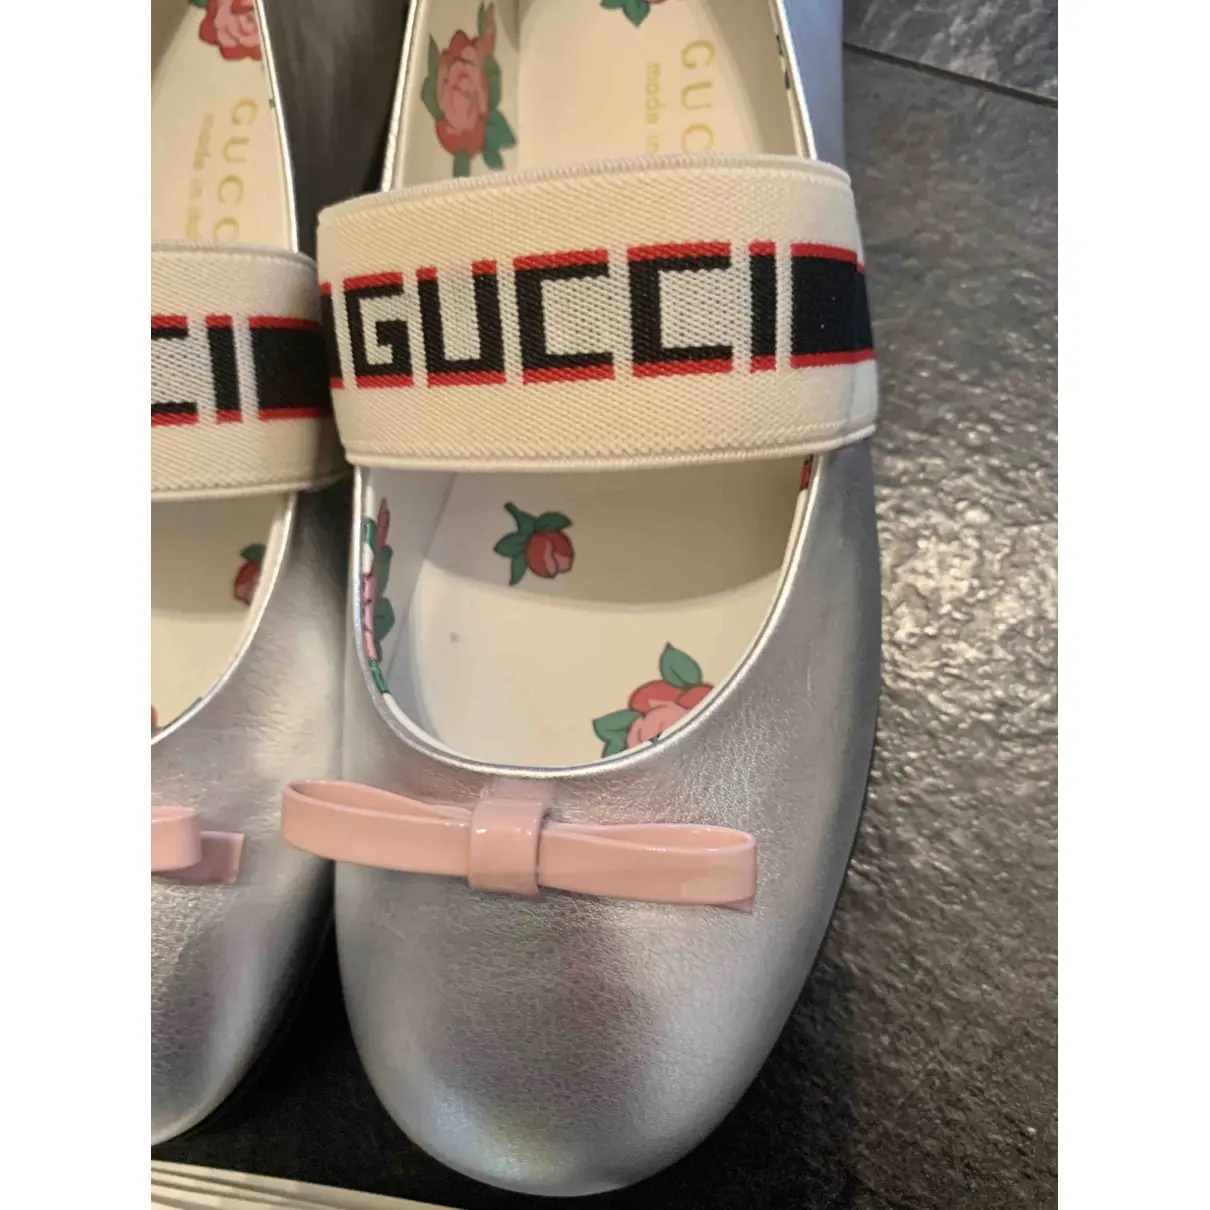 Leather ballet flats Gucci